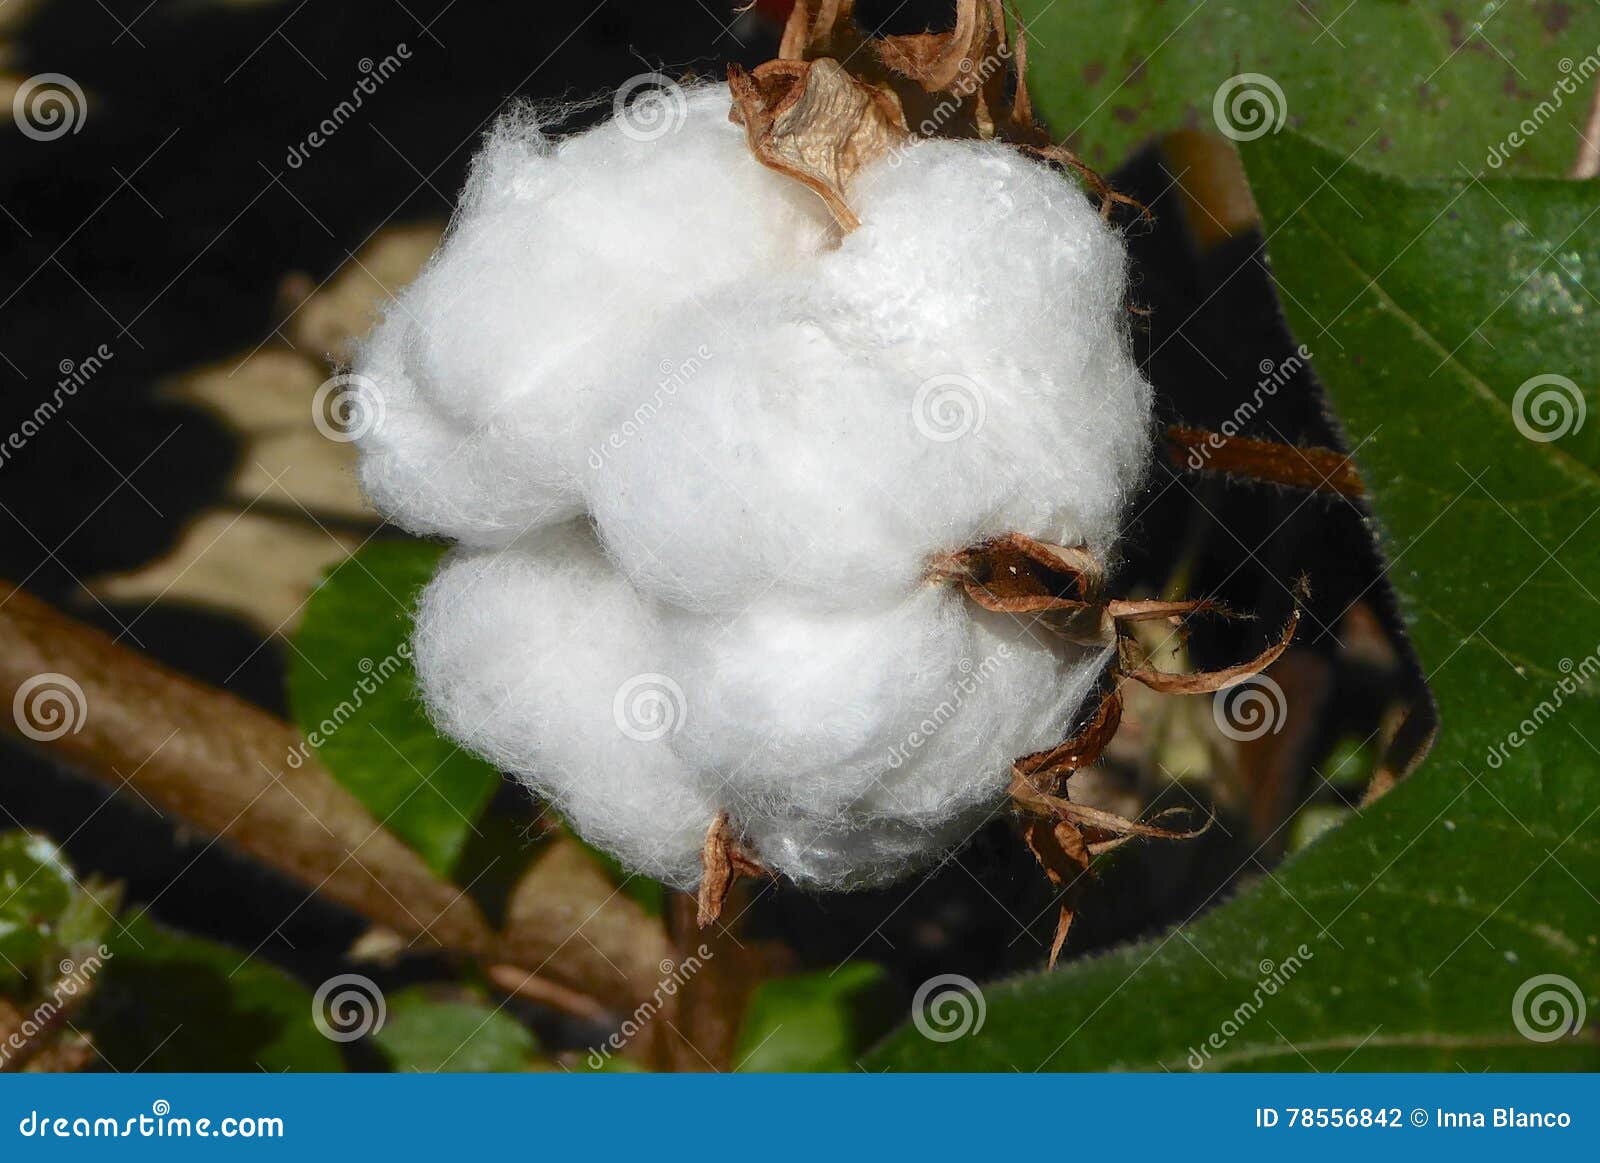 cotton balls on the plant ready to be harvested